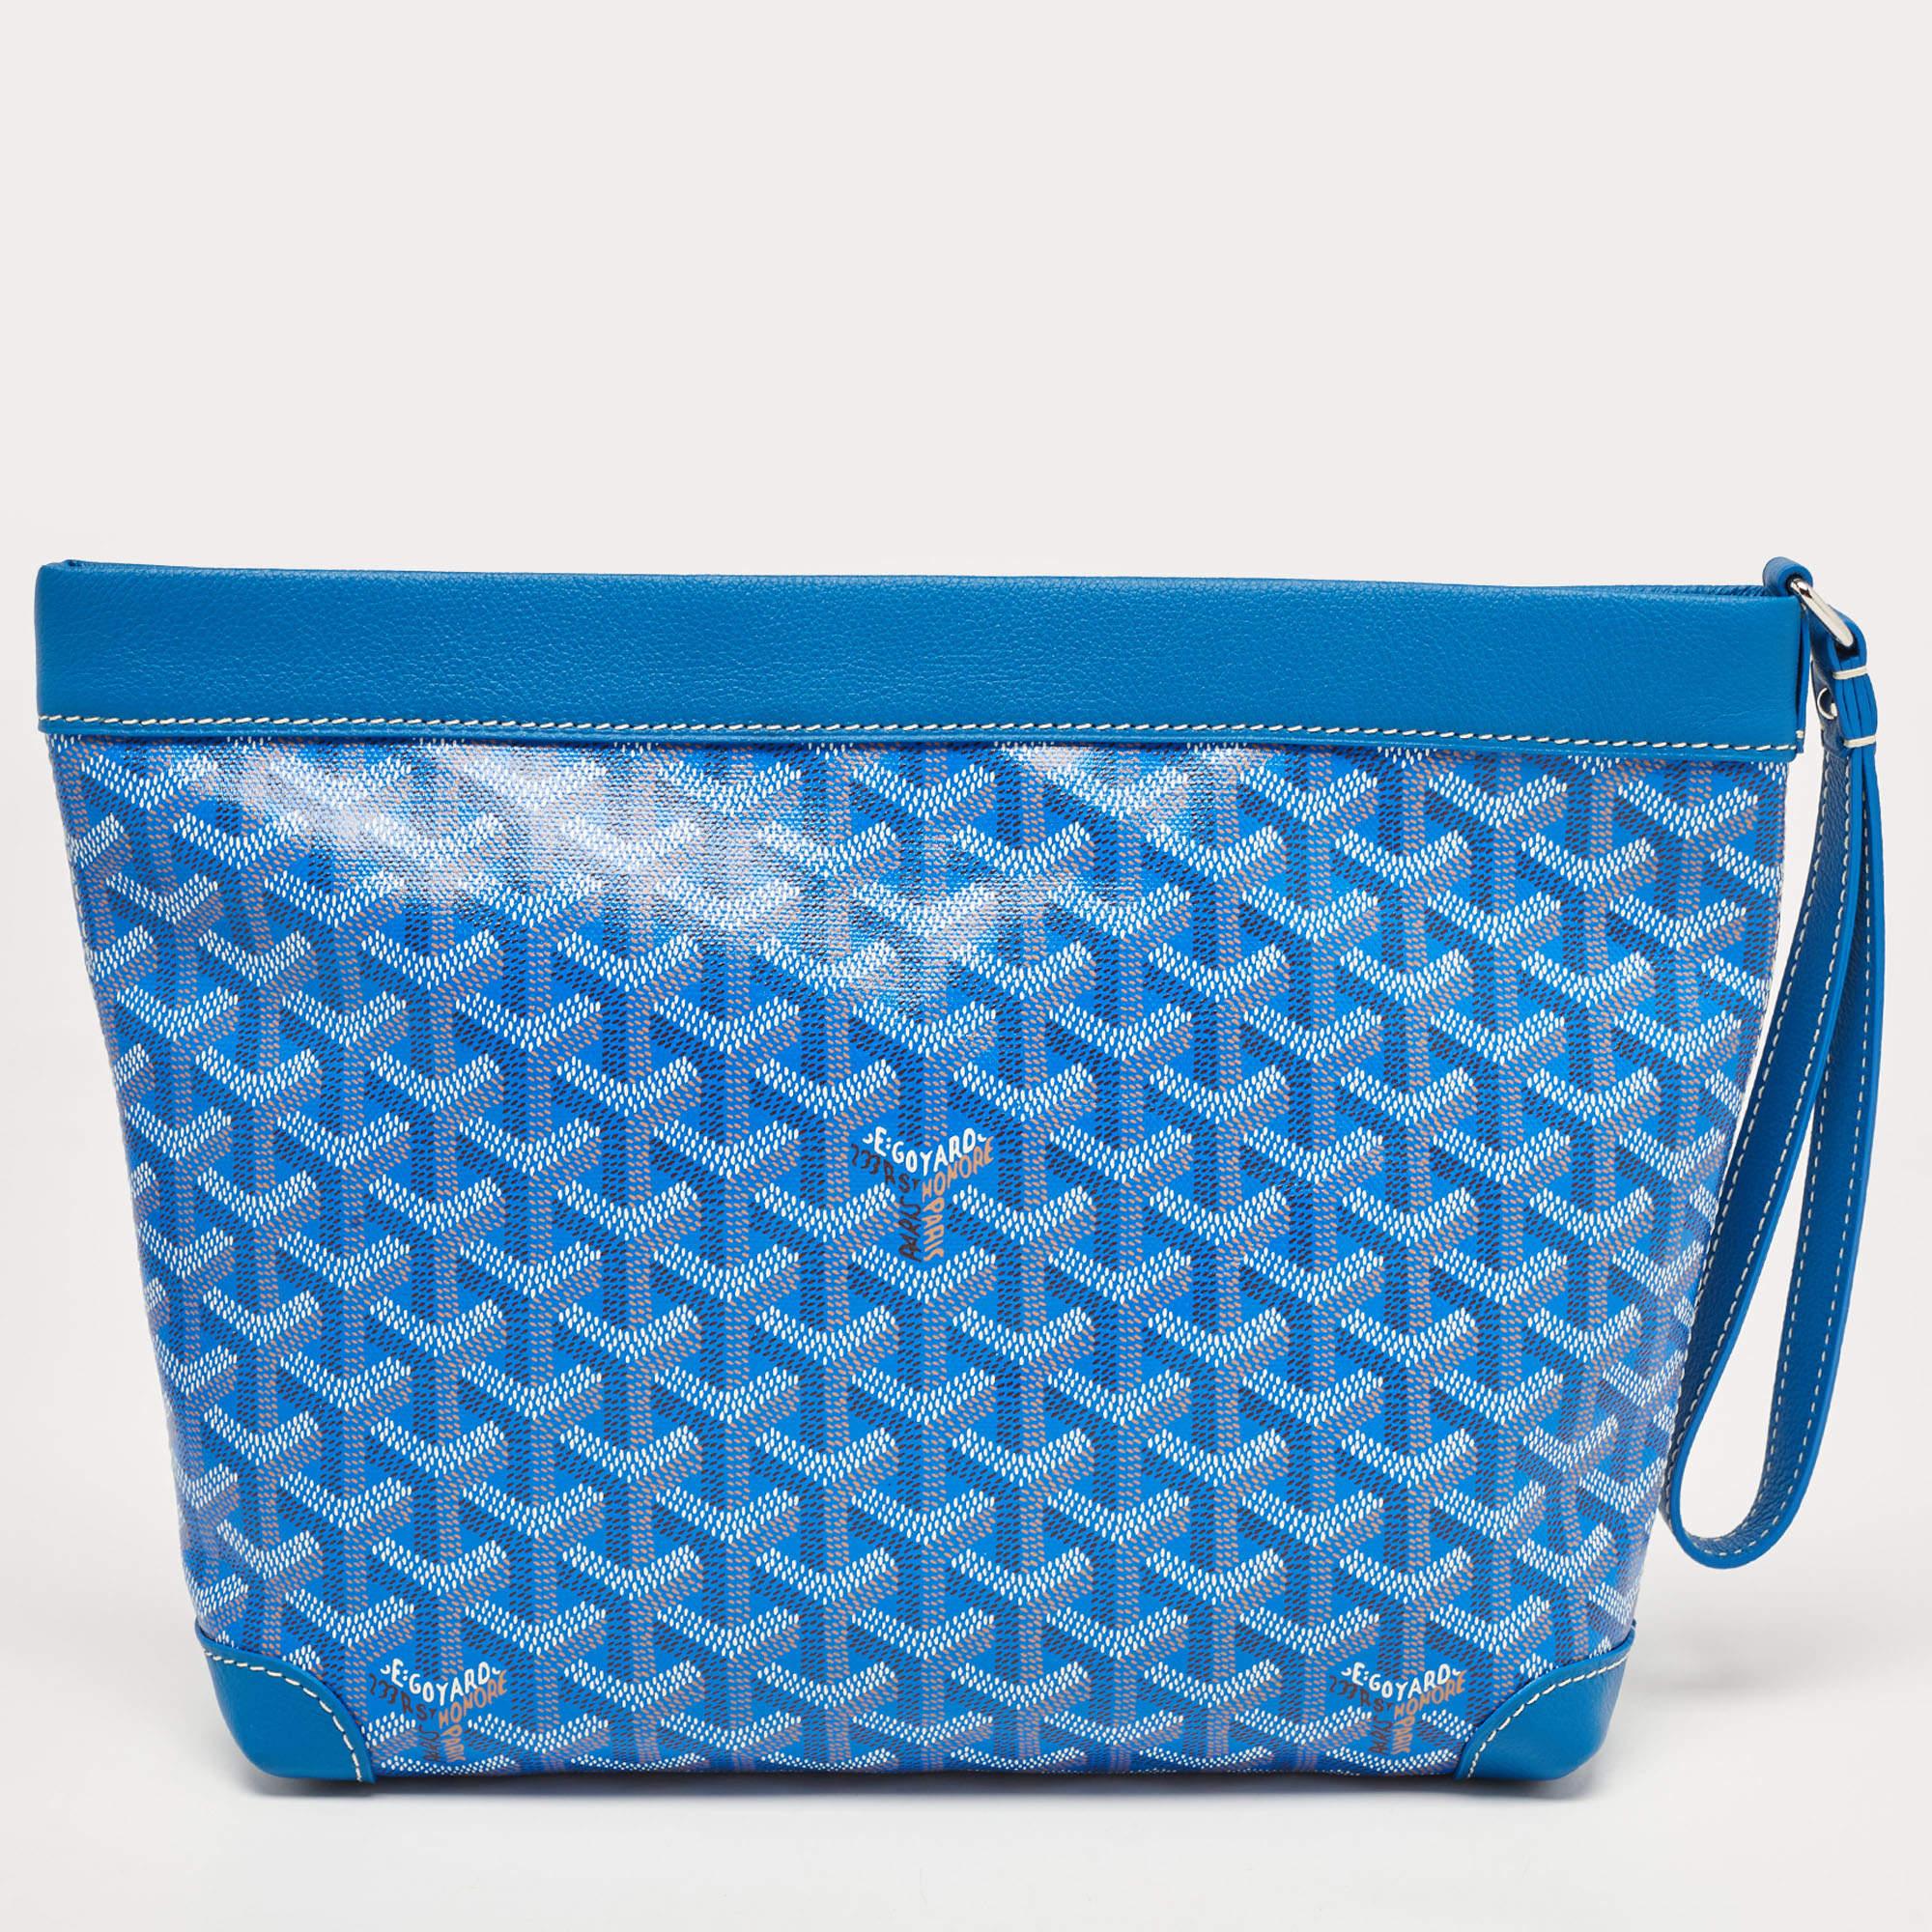 Easy to hold and perfect for housing your phone, keys, and cardholder, this Goyard pouch is a must-have. It is made of Goyardine-coated canvas & leather and finished with a wristlet.

